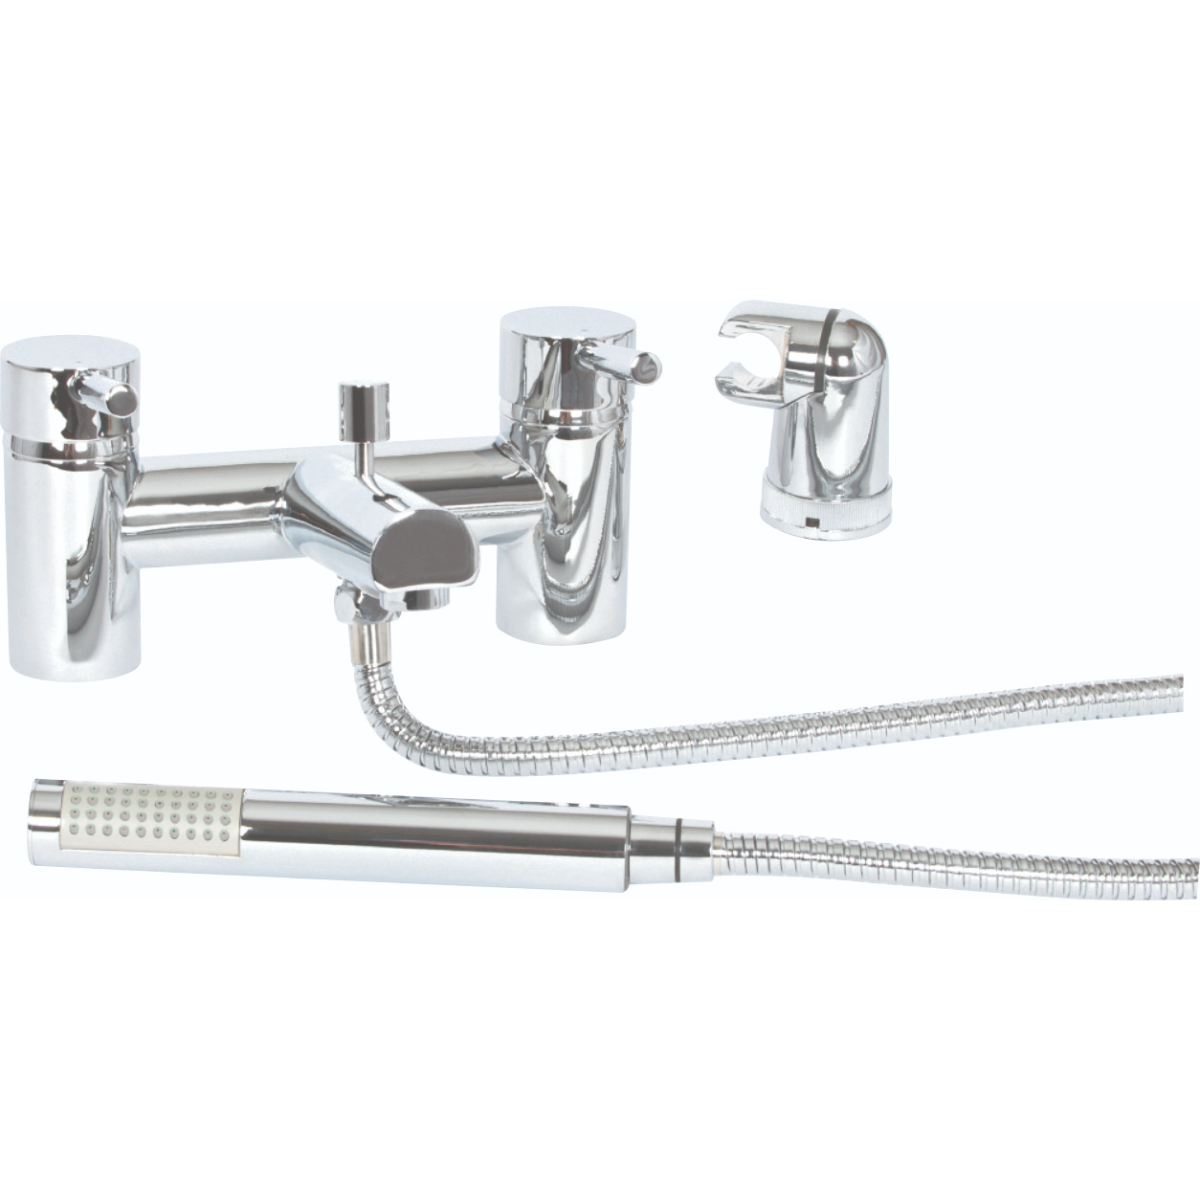 Tay Chrome Bath Shower Mixer Tap And Shower Kit